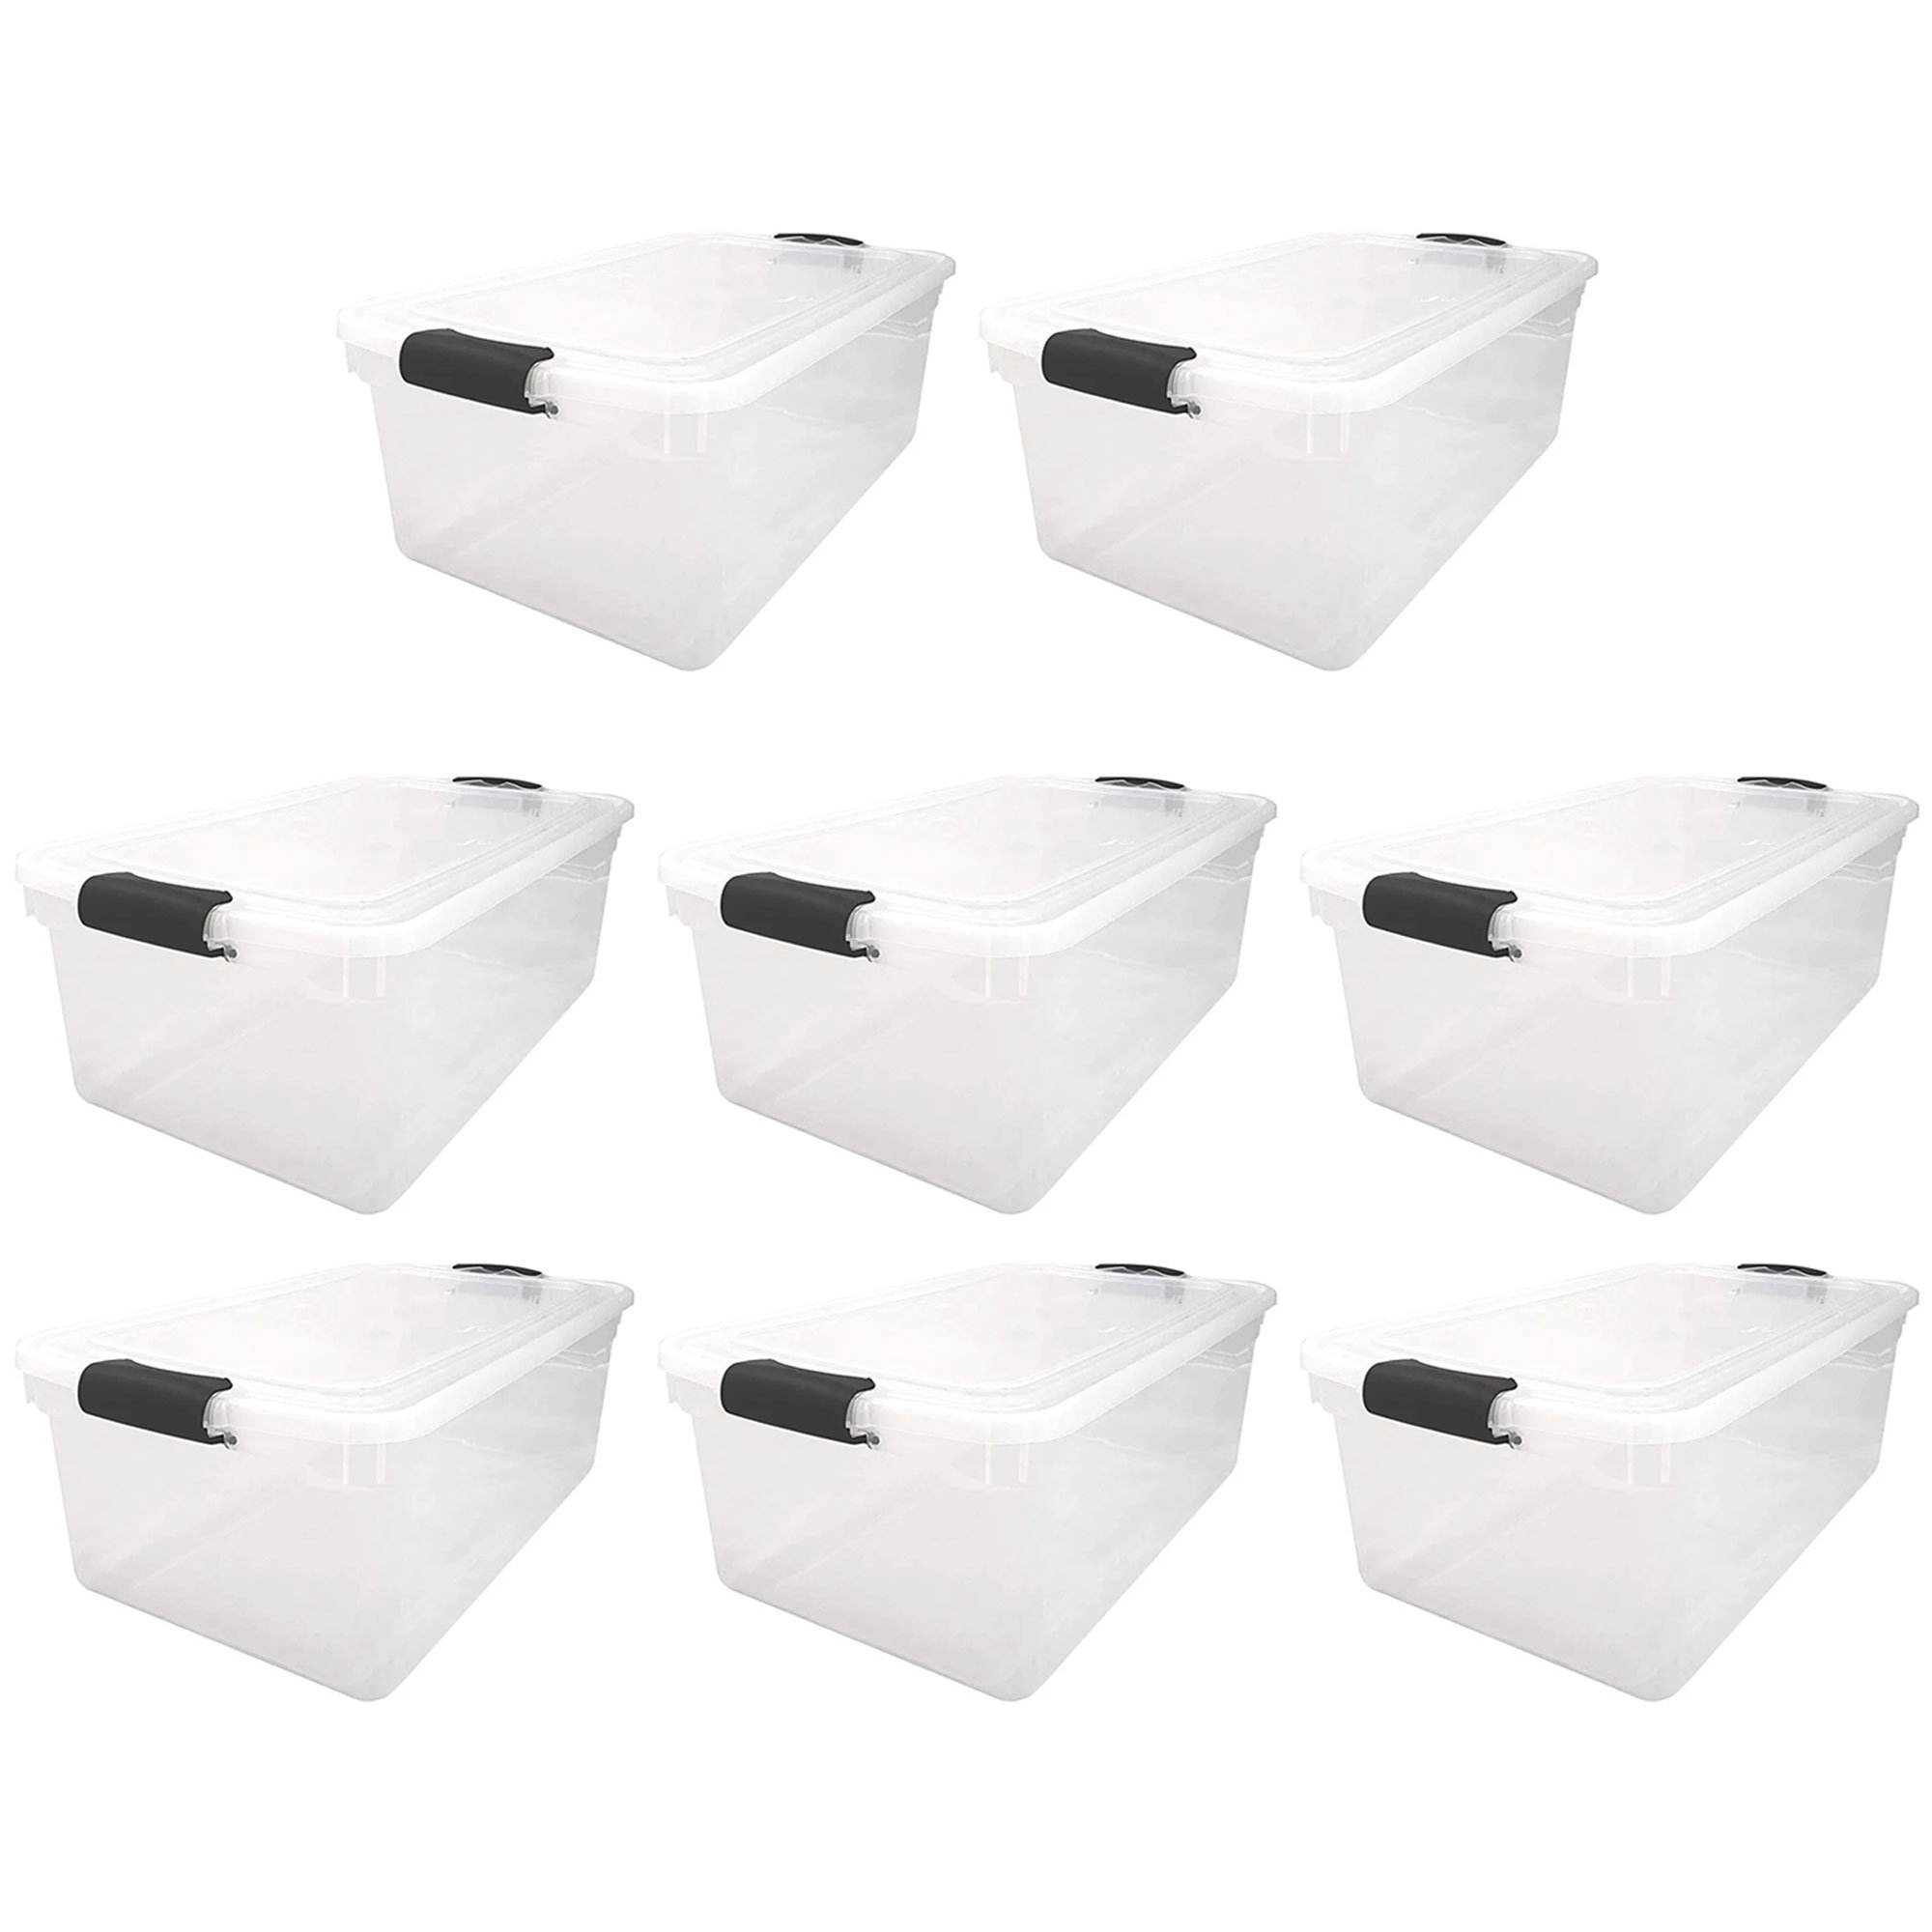  Superio Clear Storage Bins with Lids, Stackable Storage Box  with Latches and Handles, Extra Small, 4 Pack 3 Quart